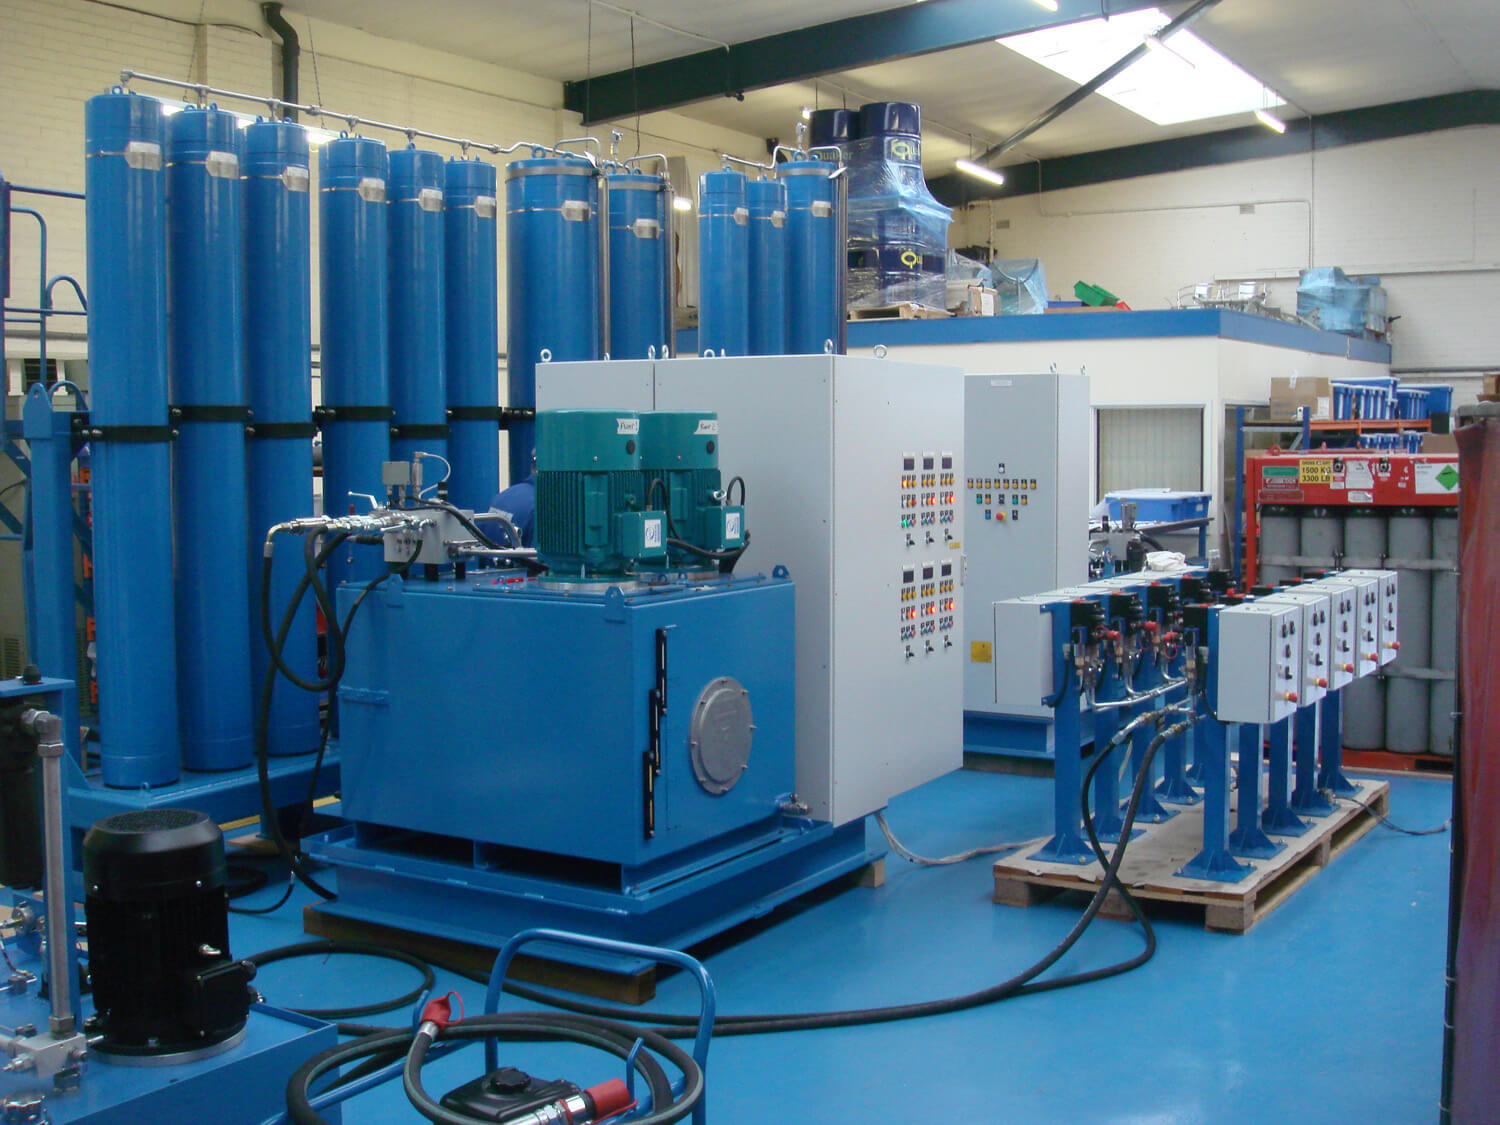 Installers of Hydraulic Power Pack Components